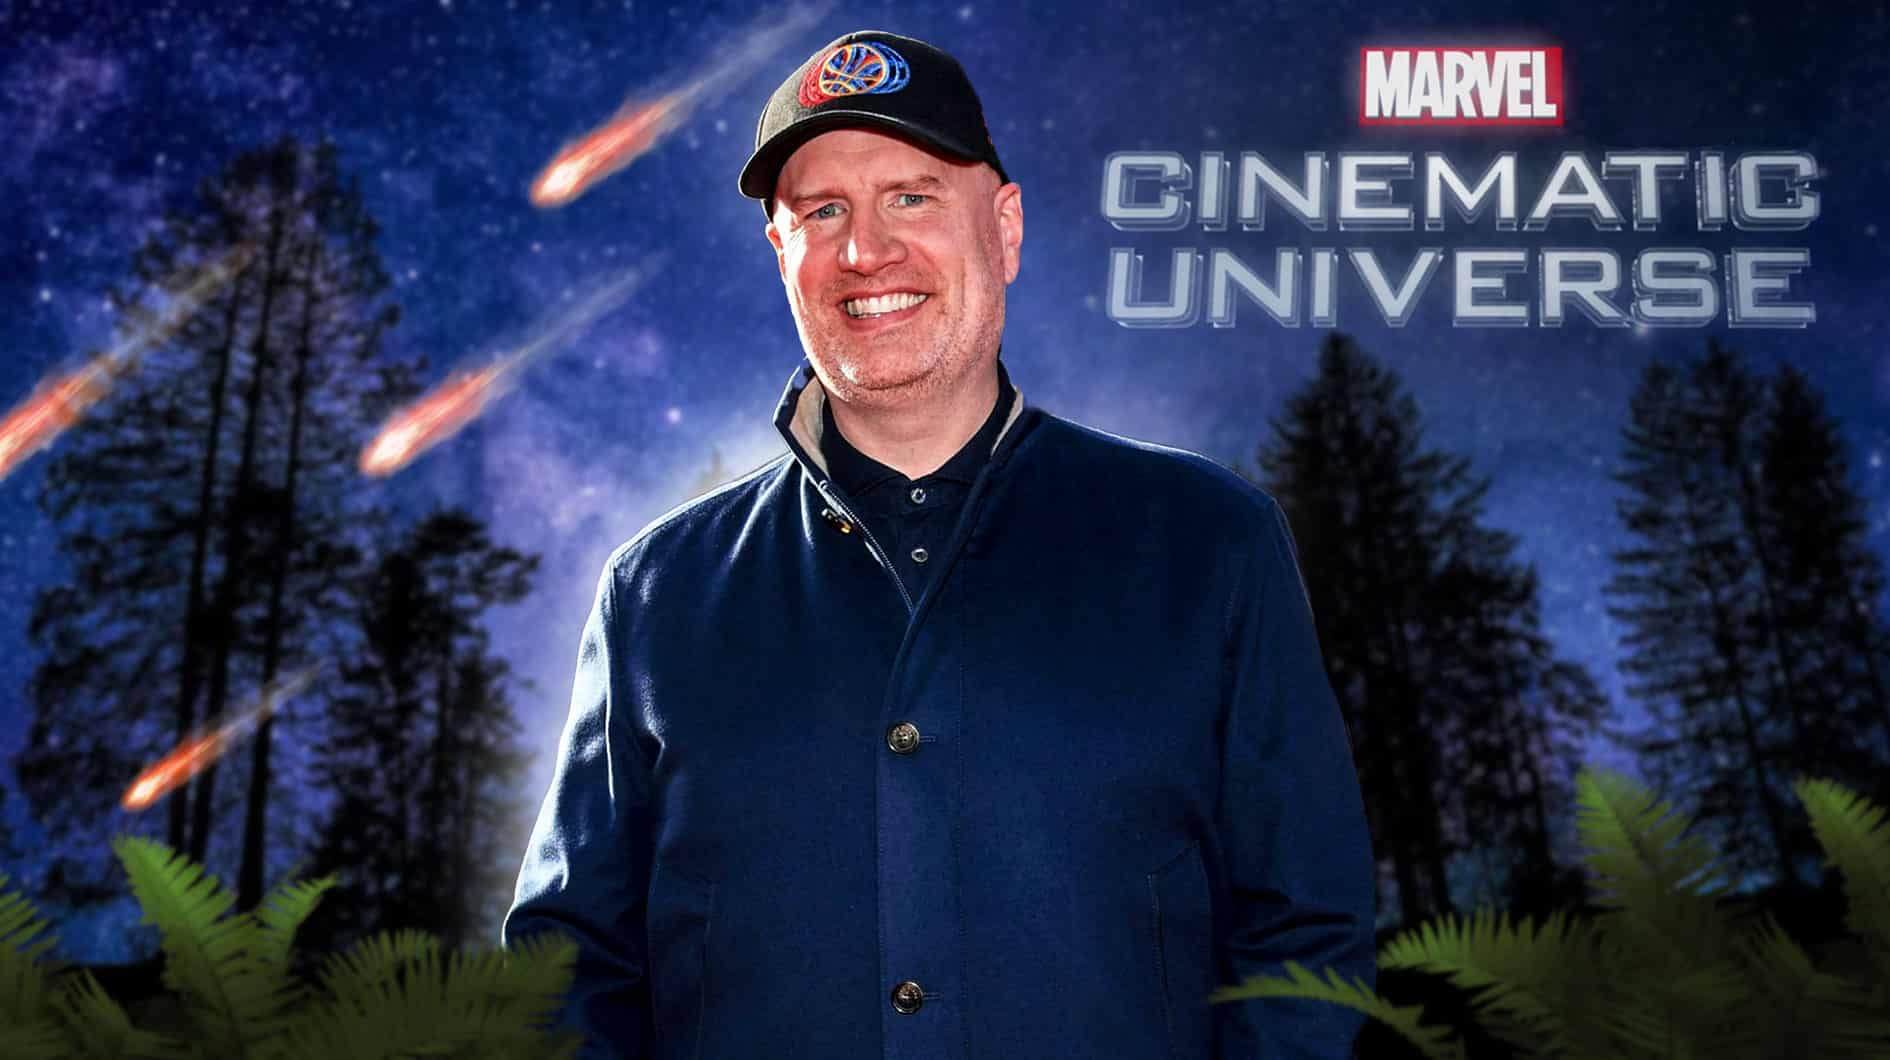 Kevin Feige with MCU logo.